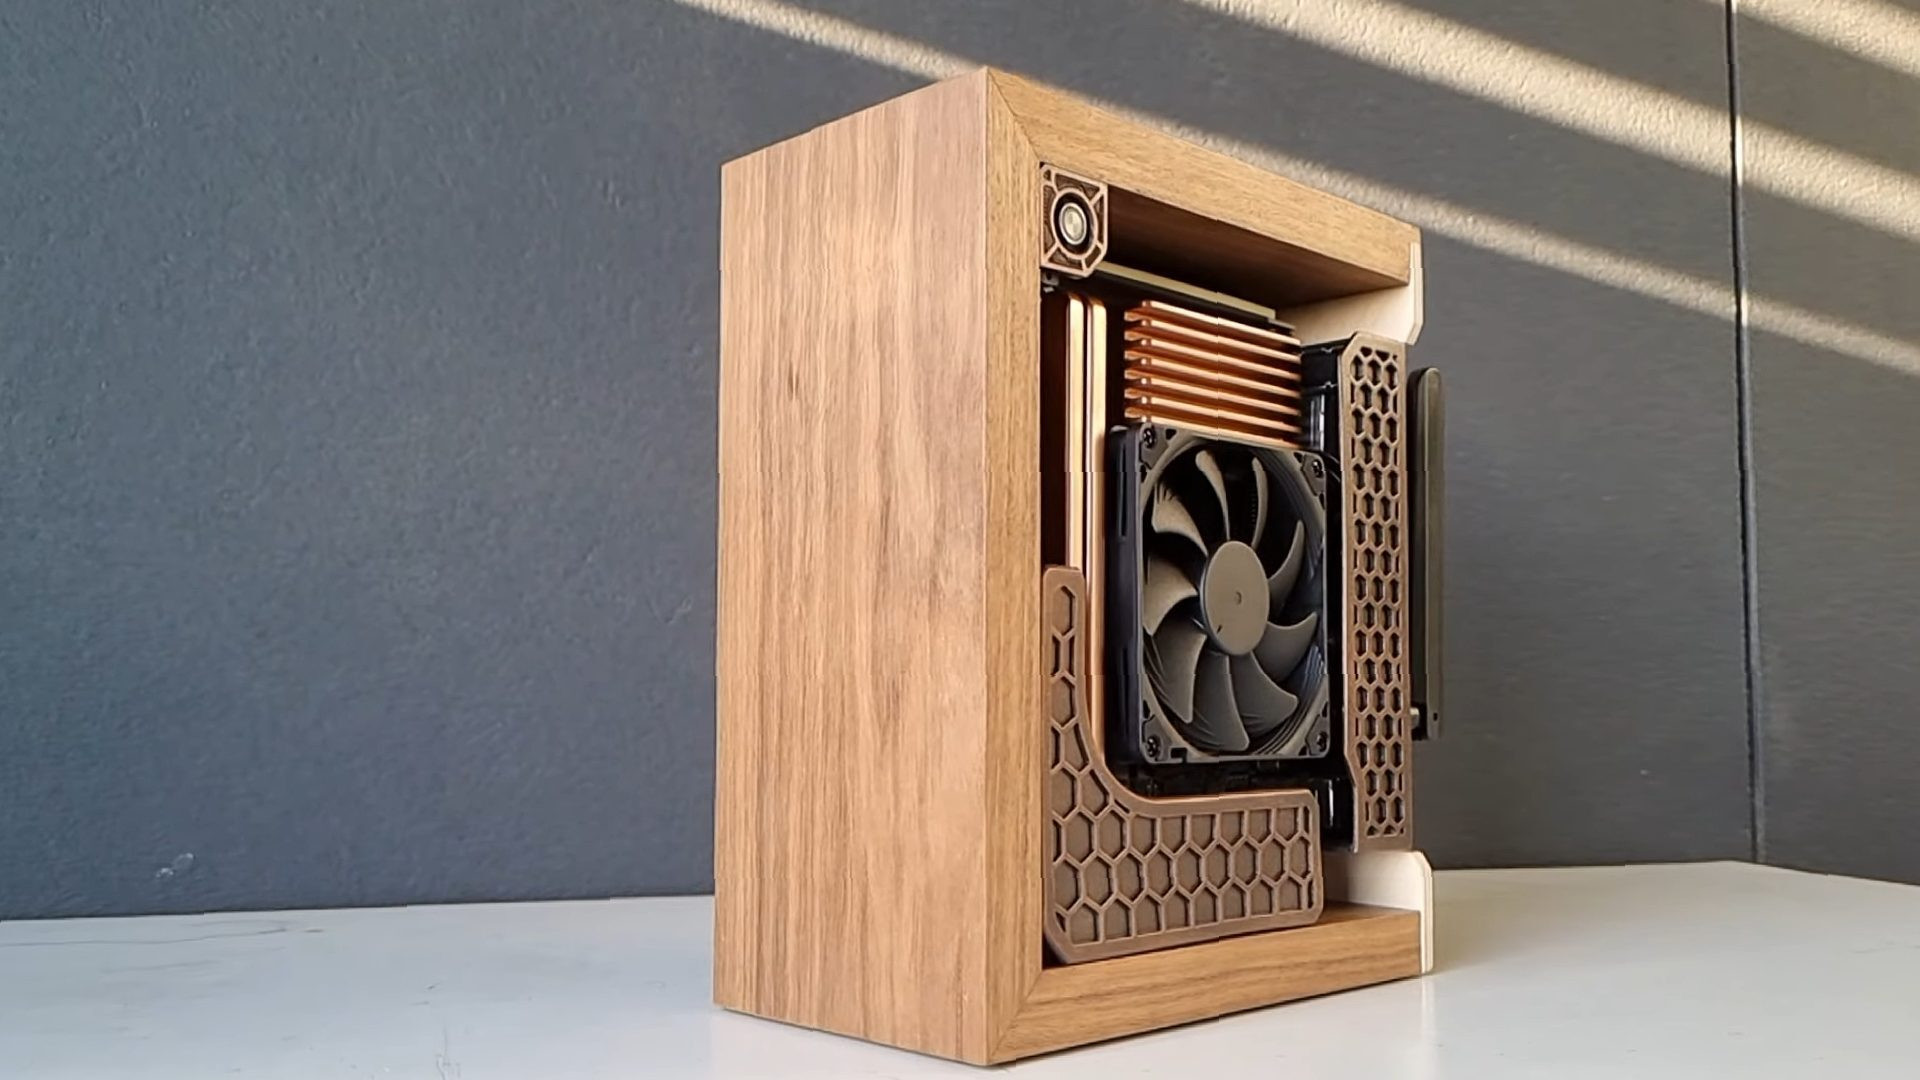 This wooden gaming PC is half the size of an Nvidia RTX 4090